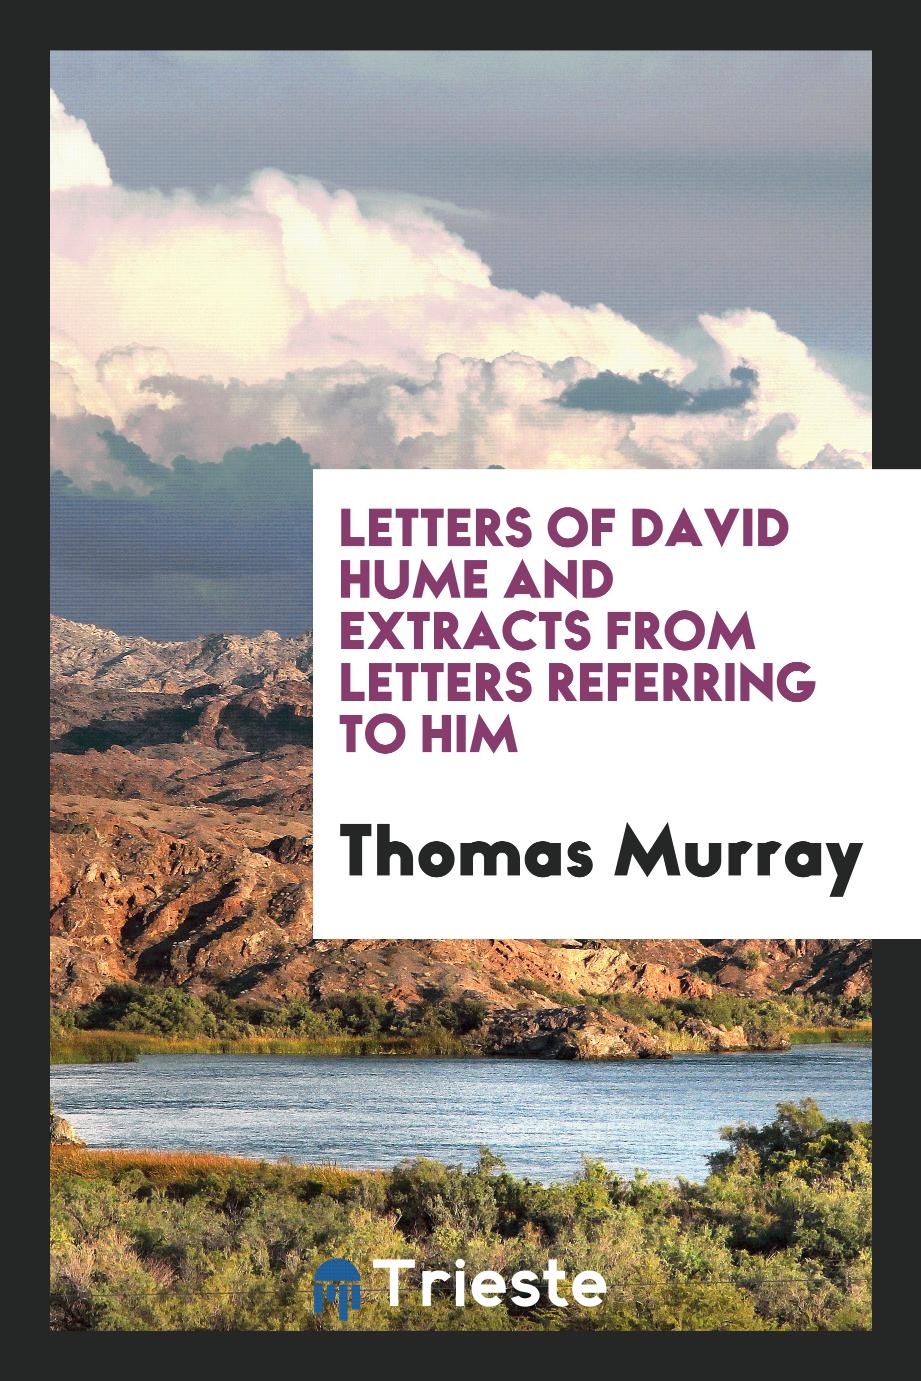 Letters of David Hume and Extracts from Letters Referring to Him